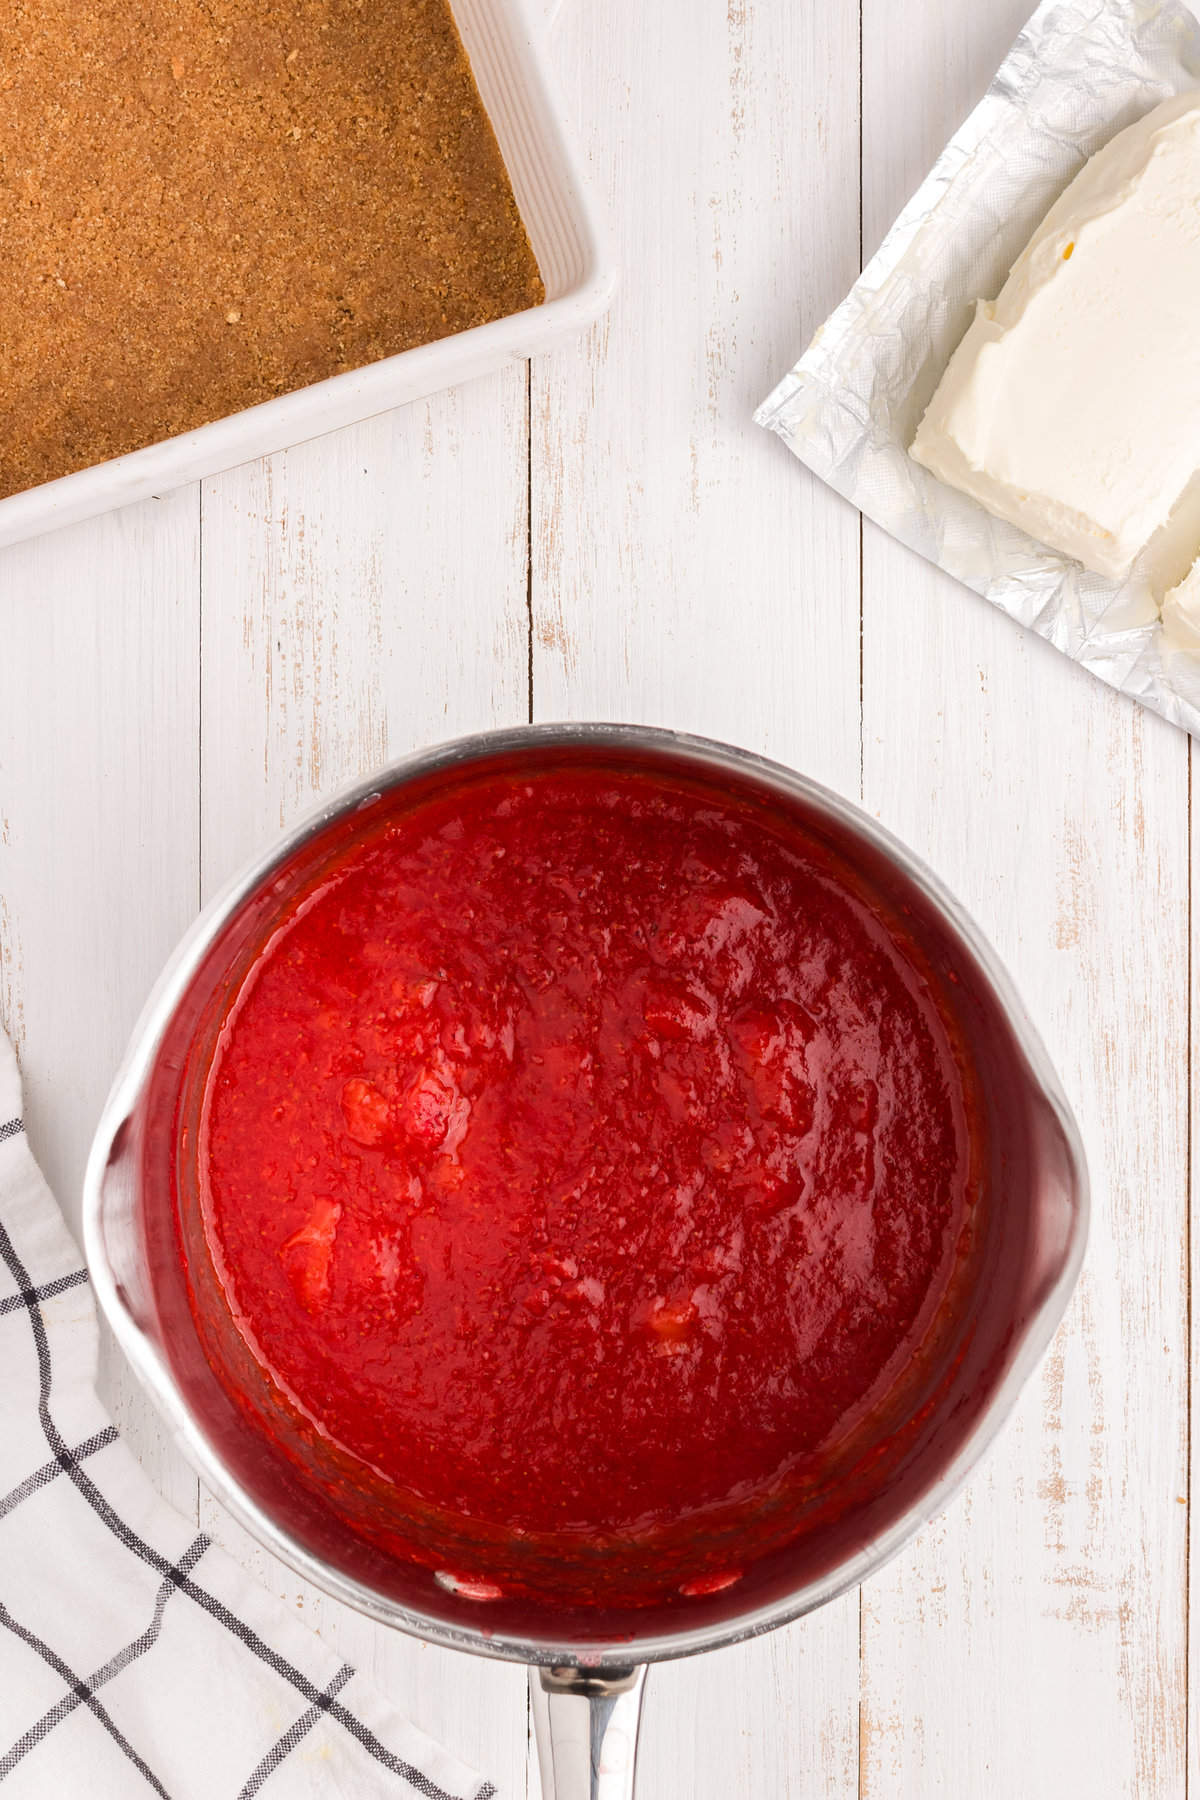 Ingredients for strawberry sauce in stovetop saucepan for Strawberry Cheesecake Bars recipe